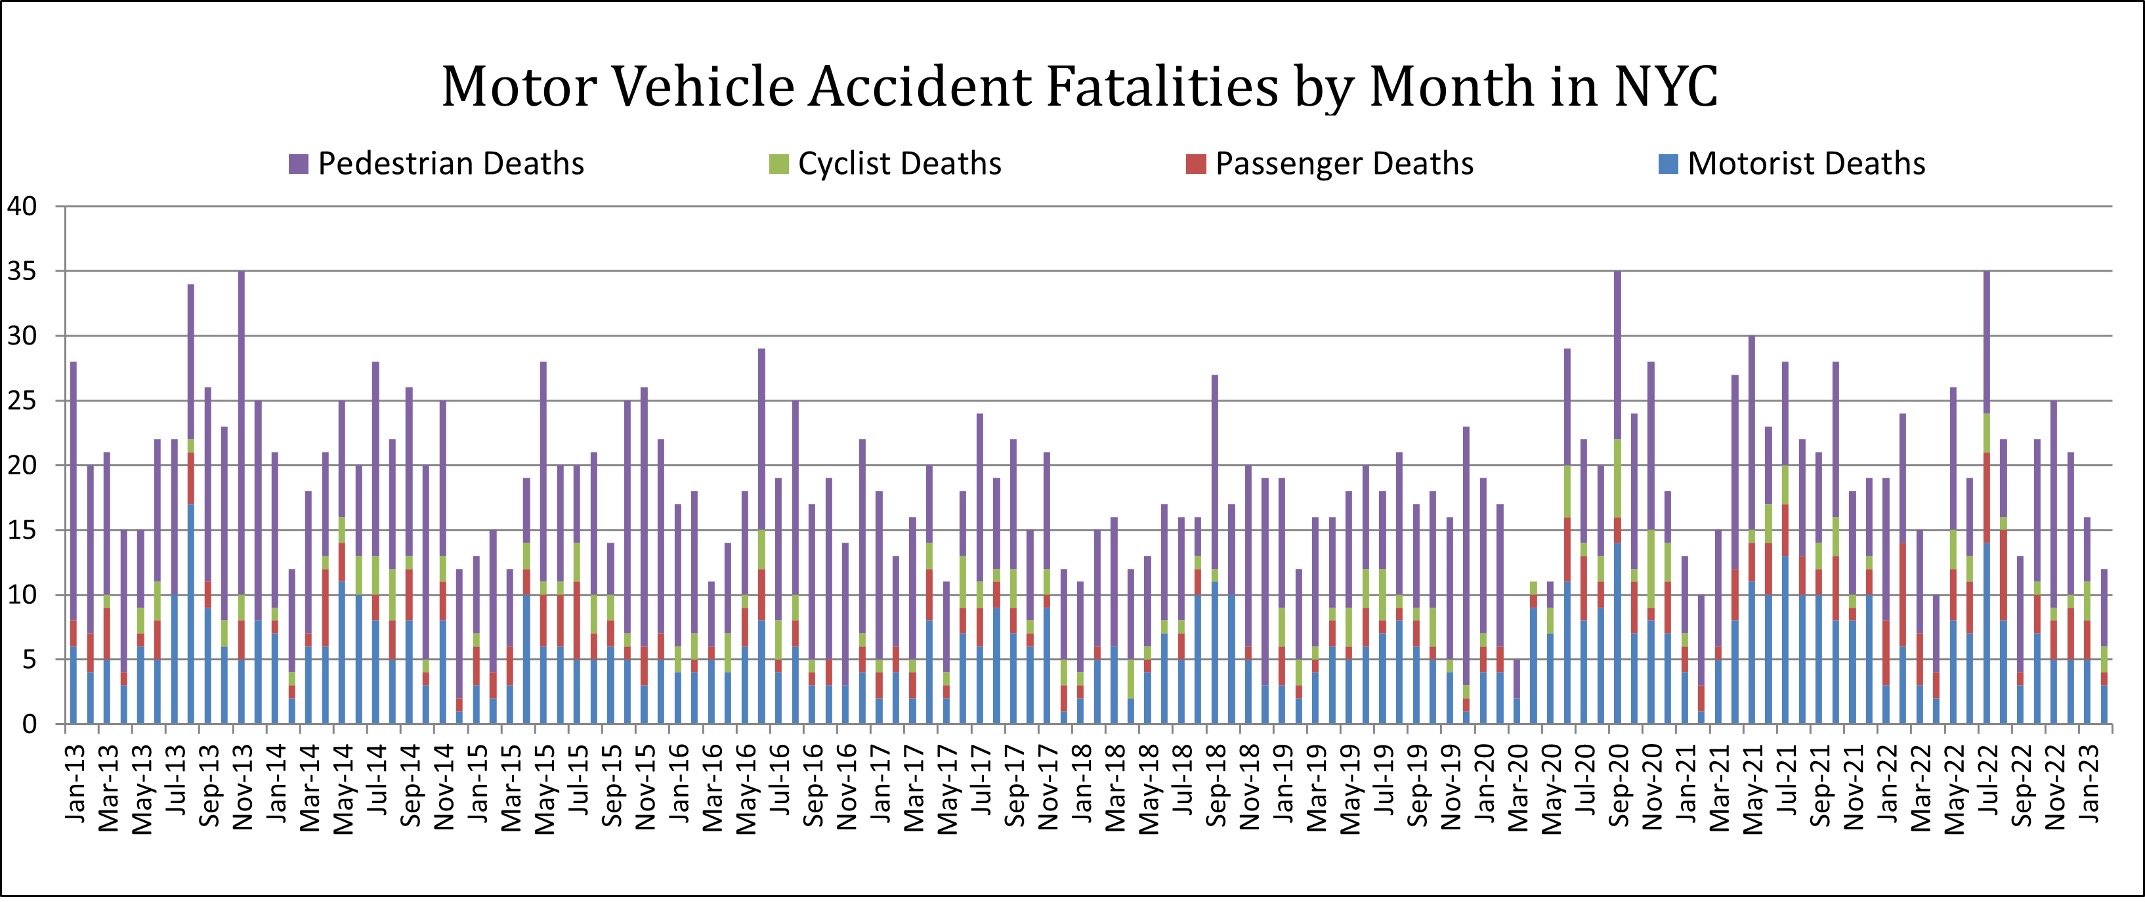 Motor Vehicle Accident Fatalities by Month in NYC